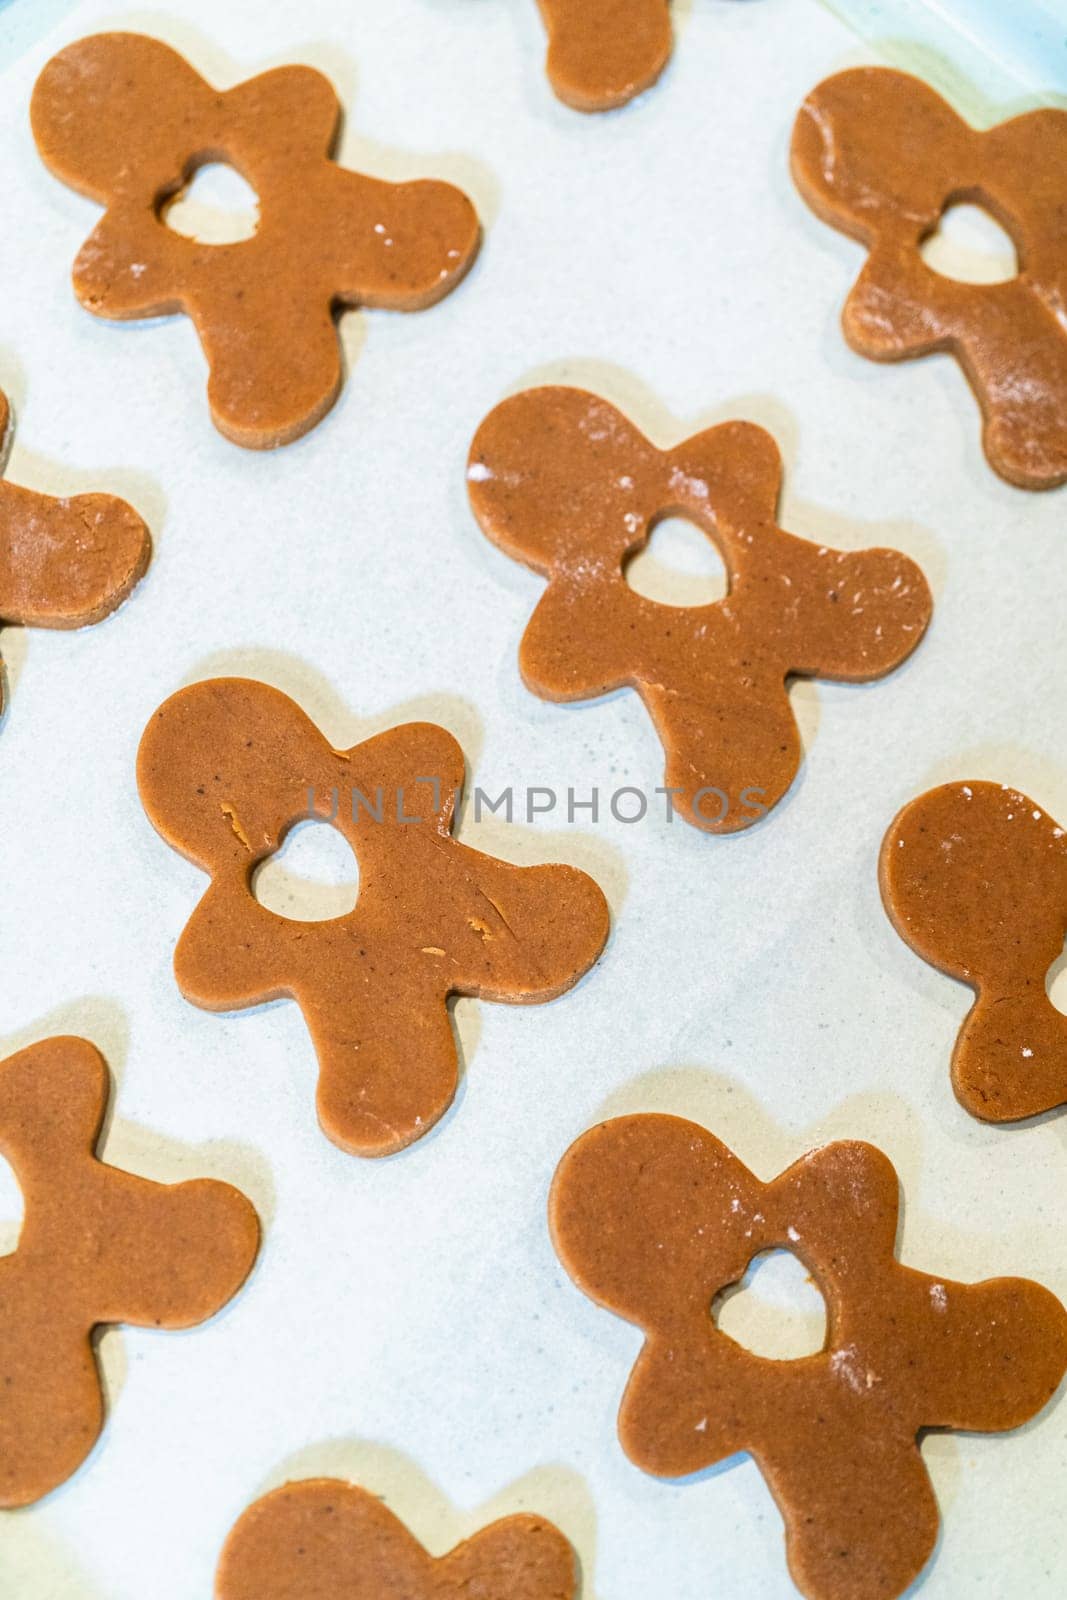 Chilled Gingerbread Cookies Ready for Baking by arinahabich